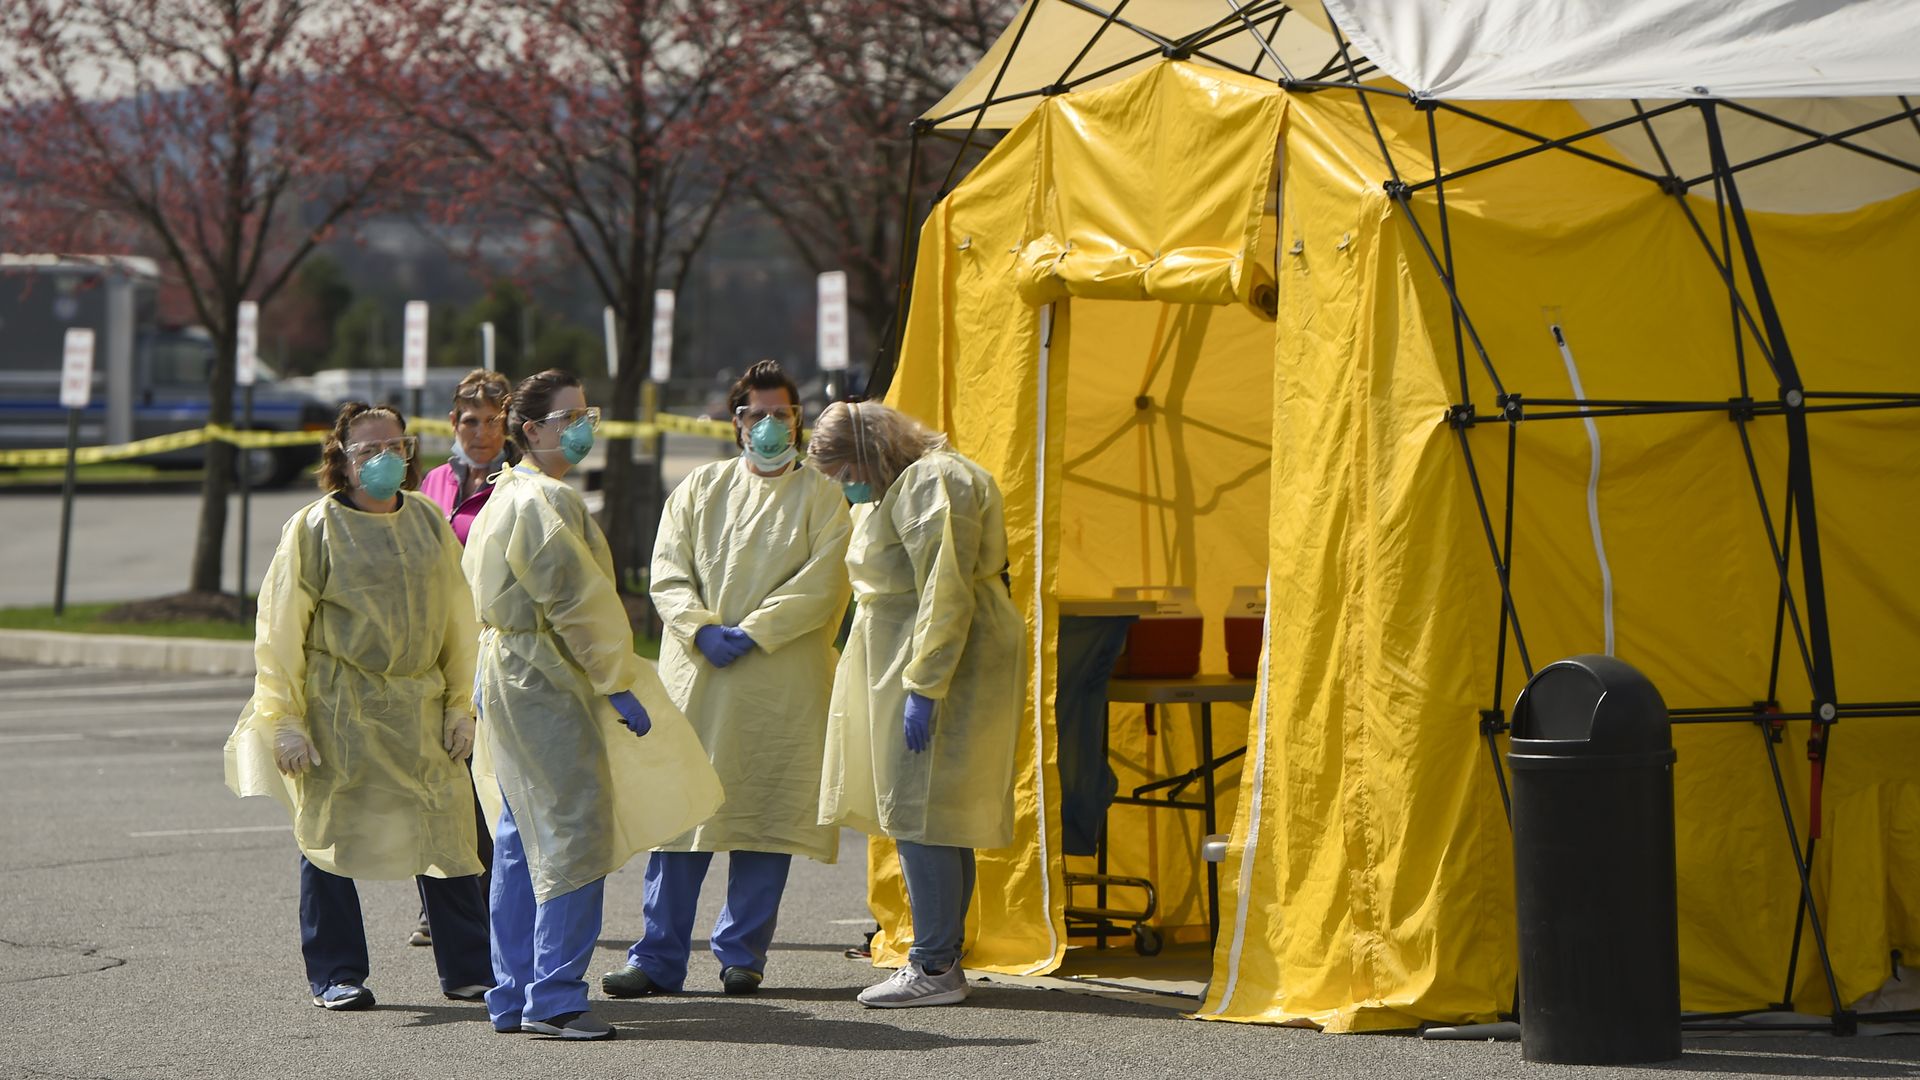 Nurses in masks, goggles, gloves, and protective gowns, wait stand outside the yellow tent 